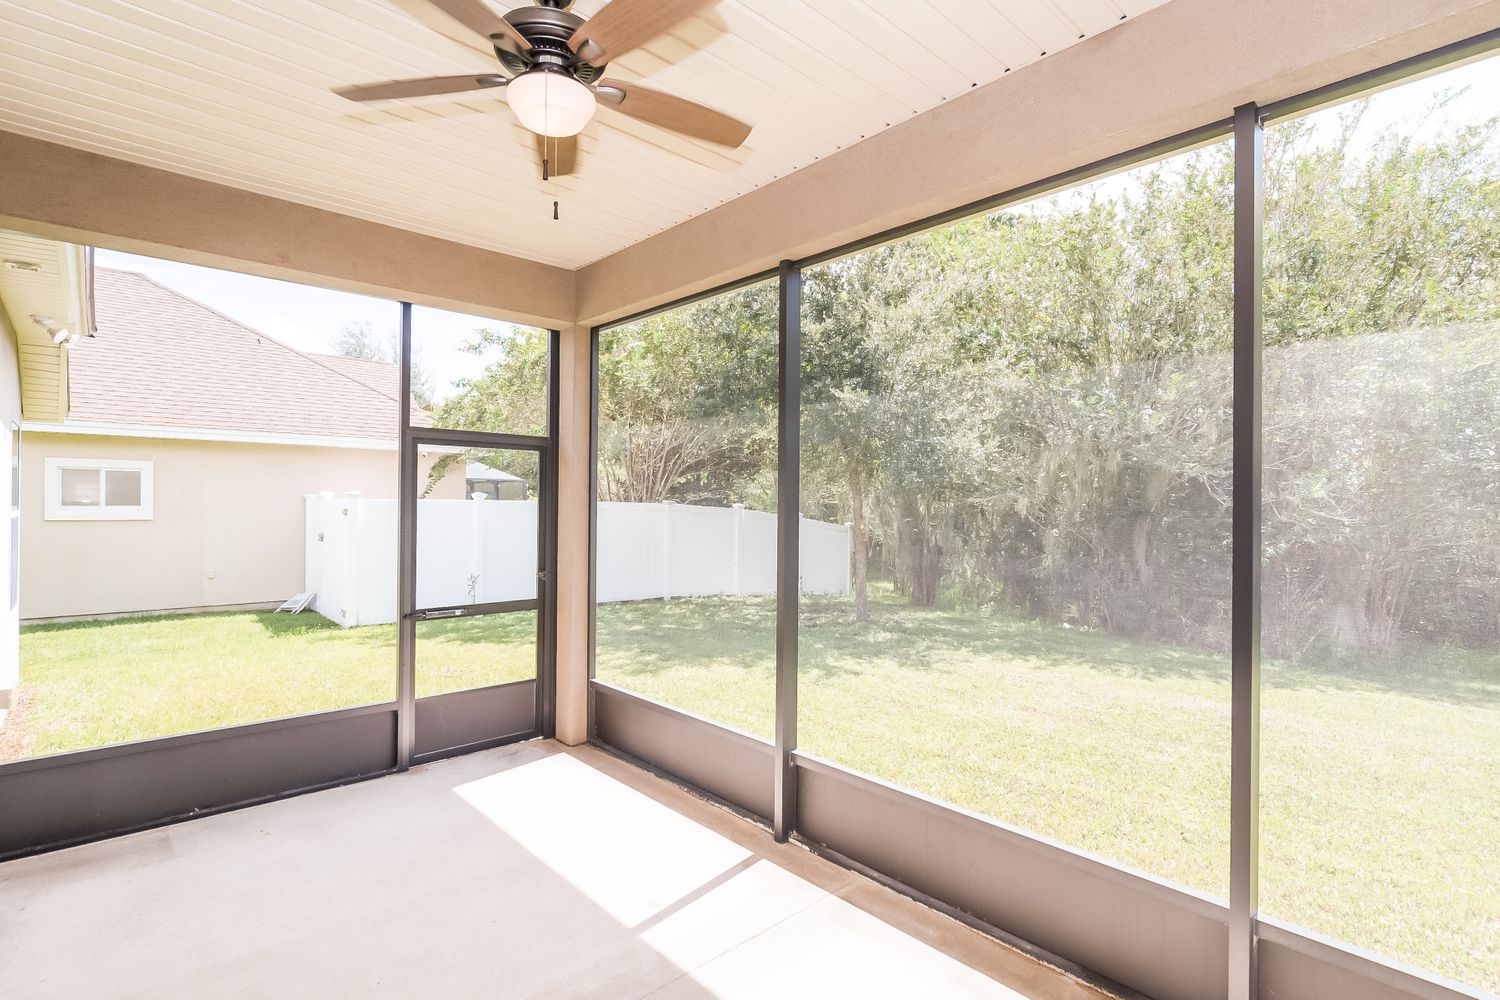 Screened-in patio with fan at Invitation Homes Jacksonville.